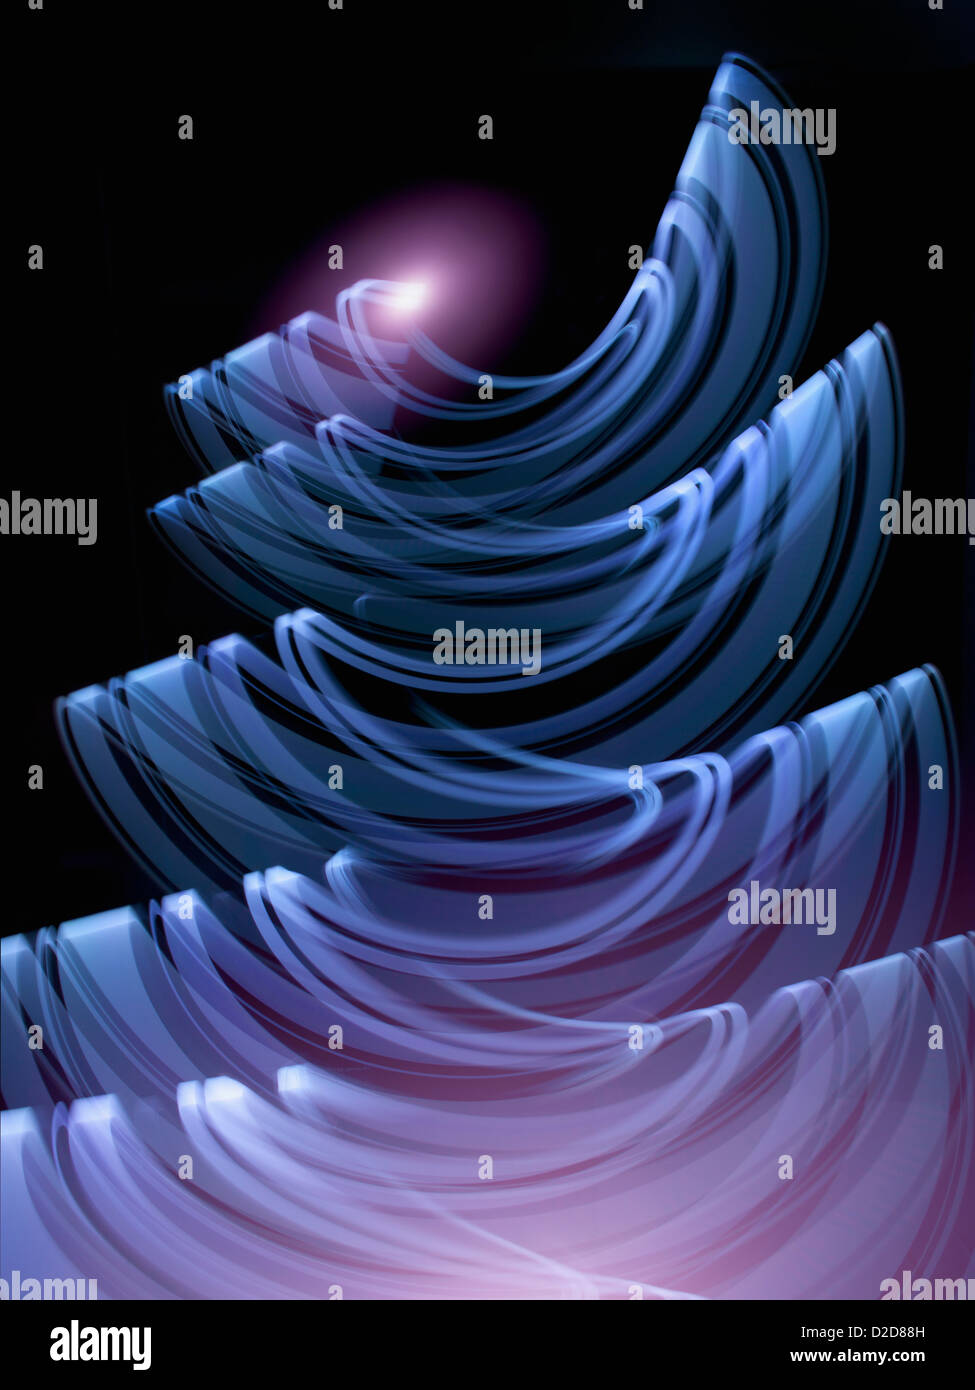 Violet, blue light trails creating an abstract wave pattern on black background Stock Photo